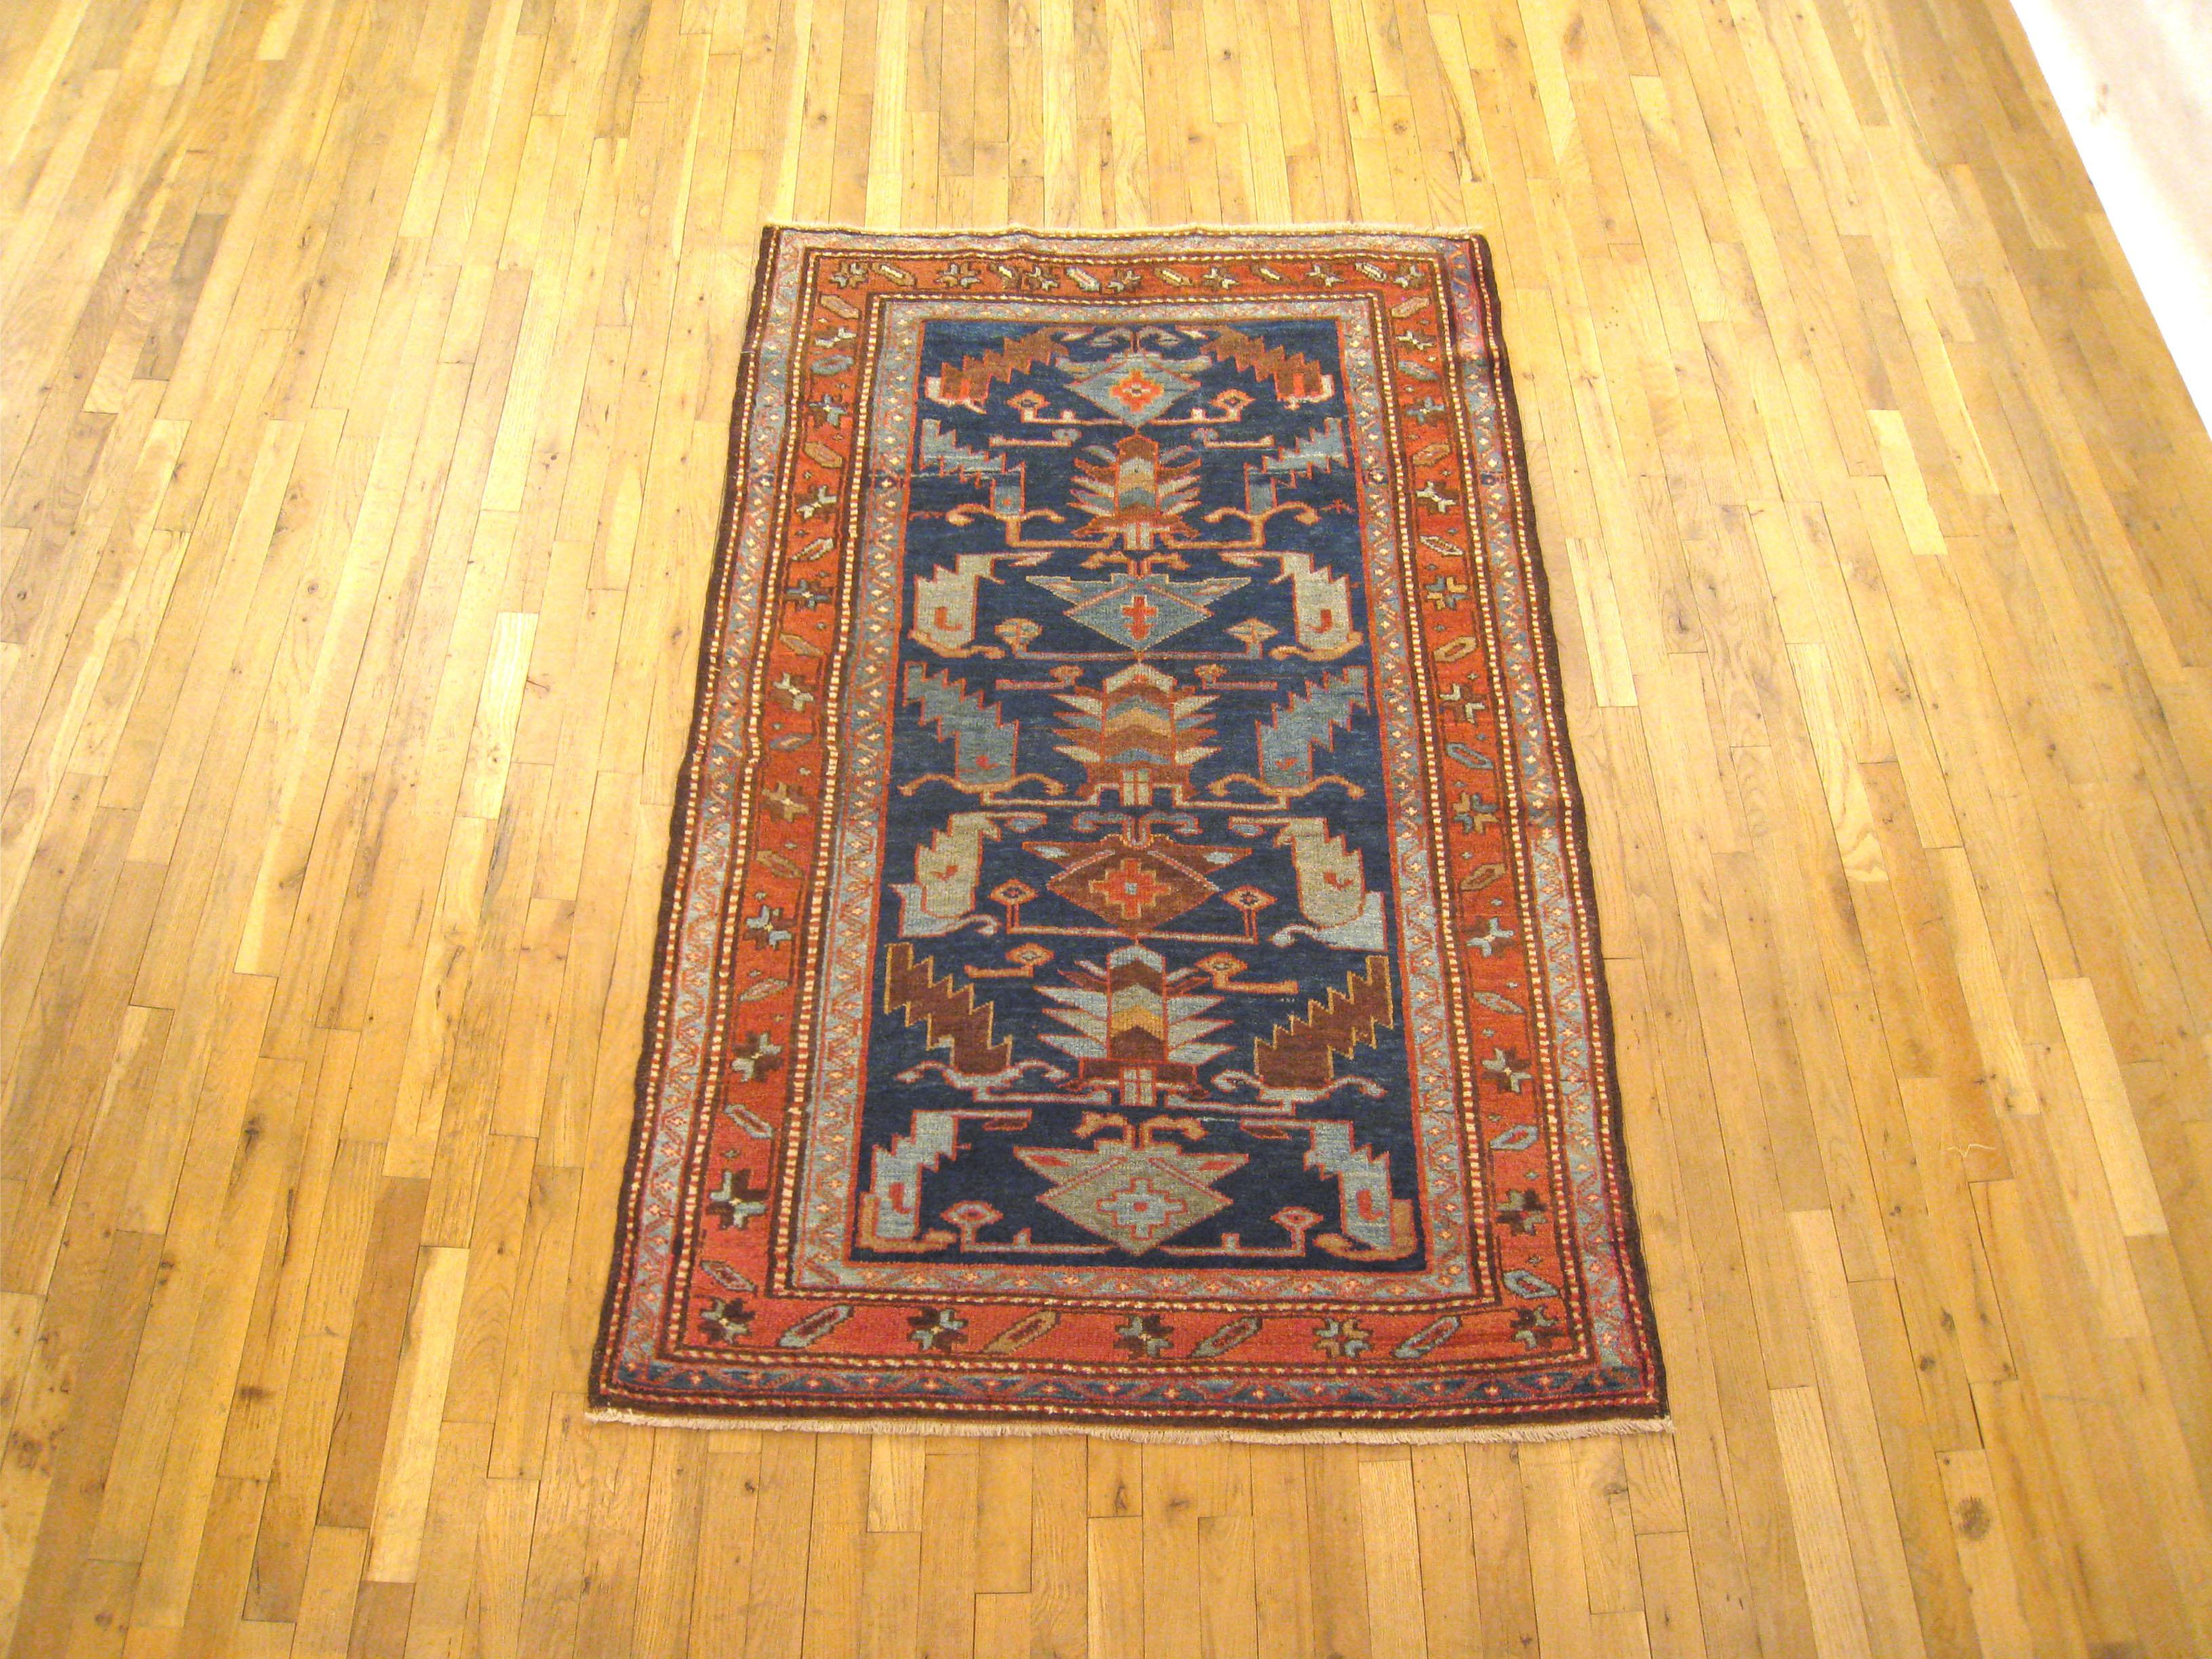 An antique Persian Hamadan oriental rug, size 6'2 x 4'0, circa 1920. This small, handwoven wool carpet features a large-scale geometric design in the blue central field, which is enclosed within several layers of unobtrusive outer borders. In